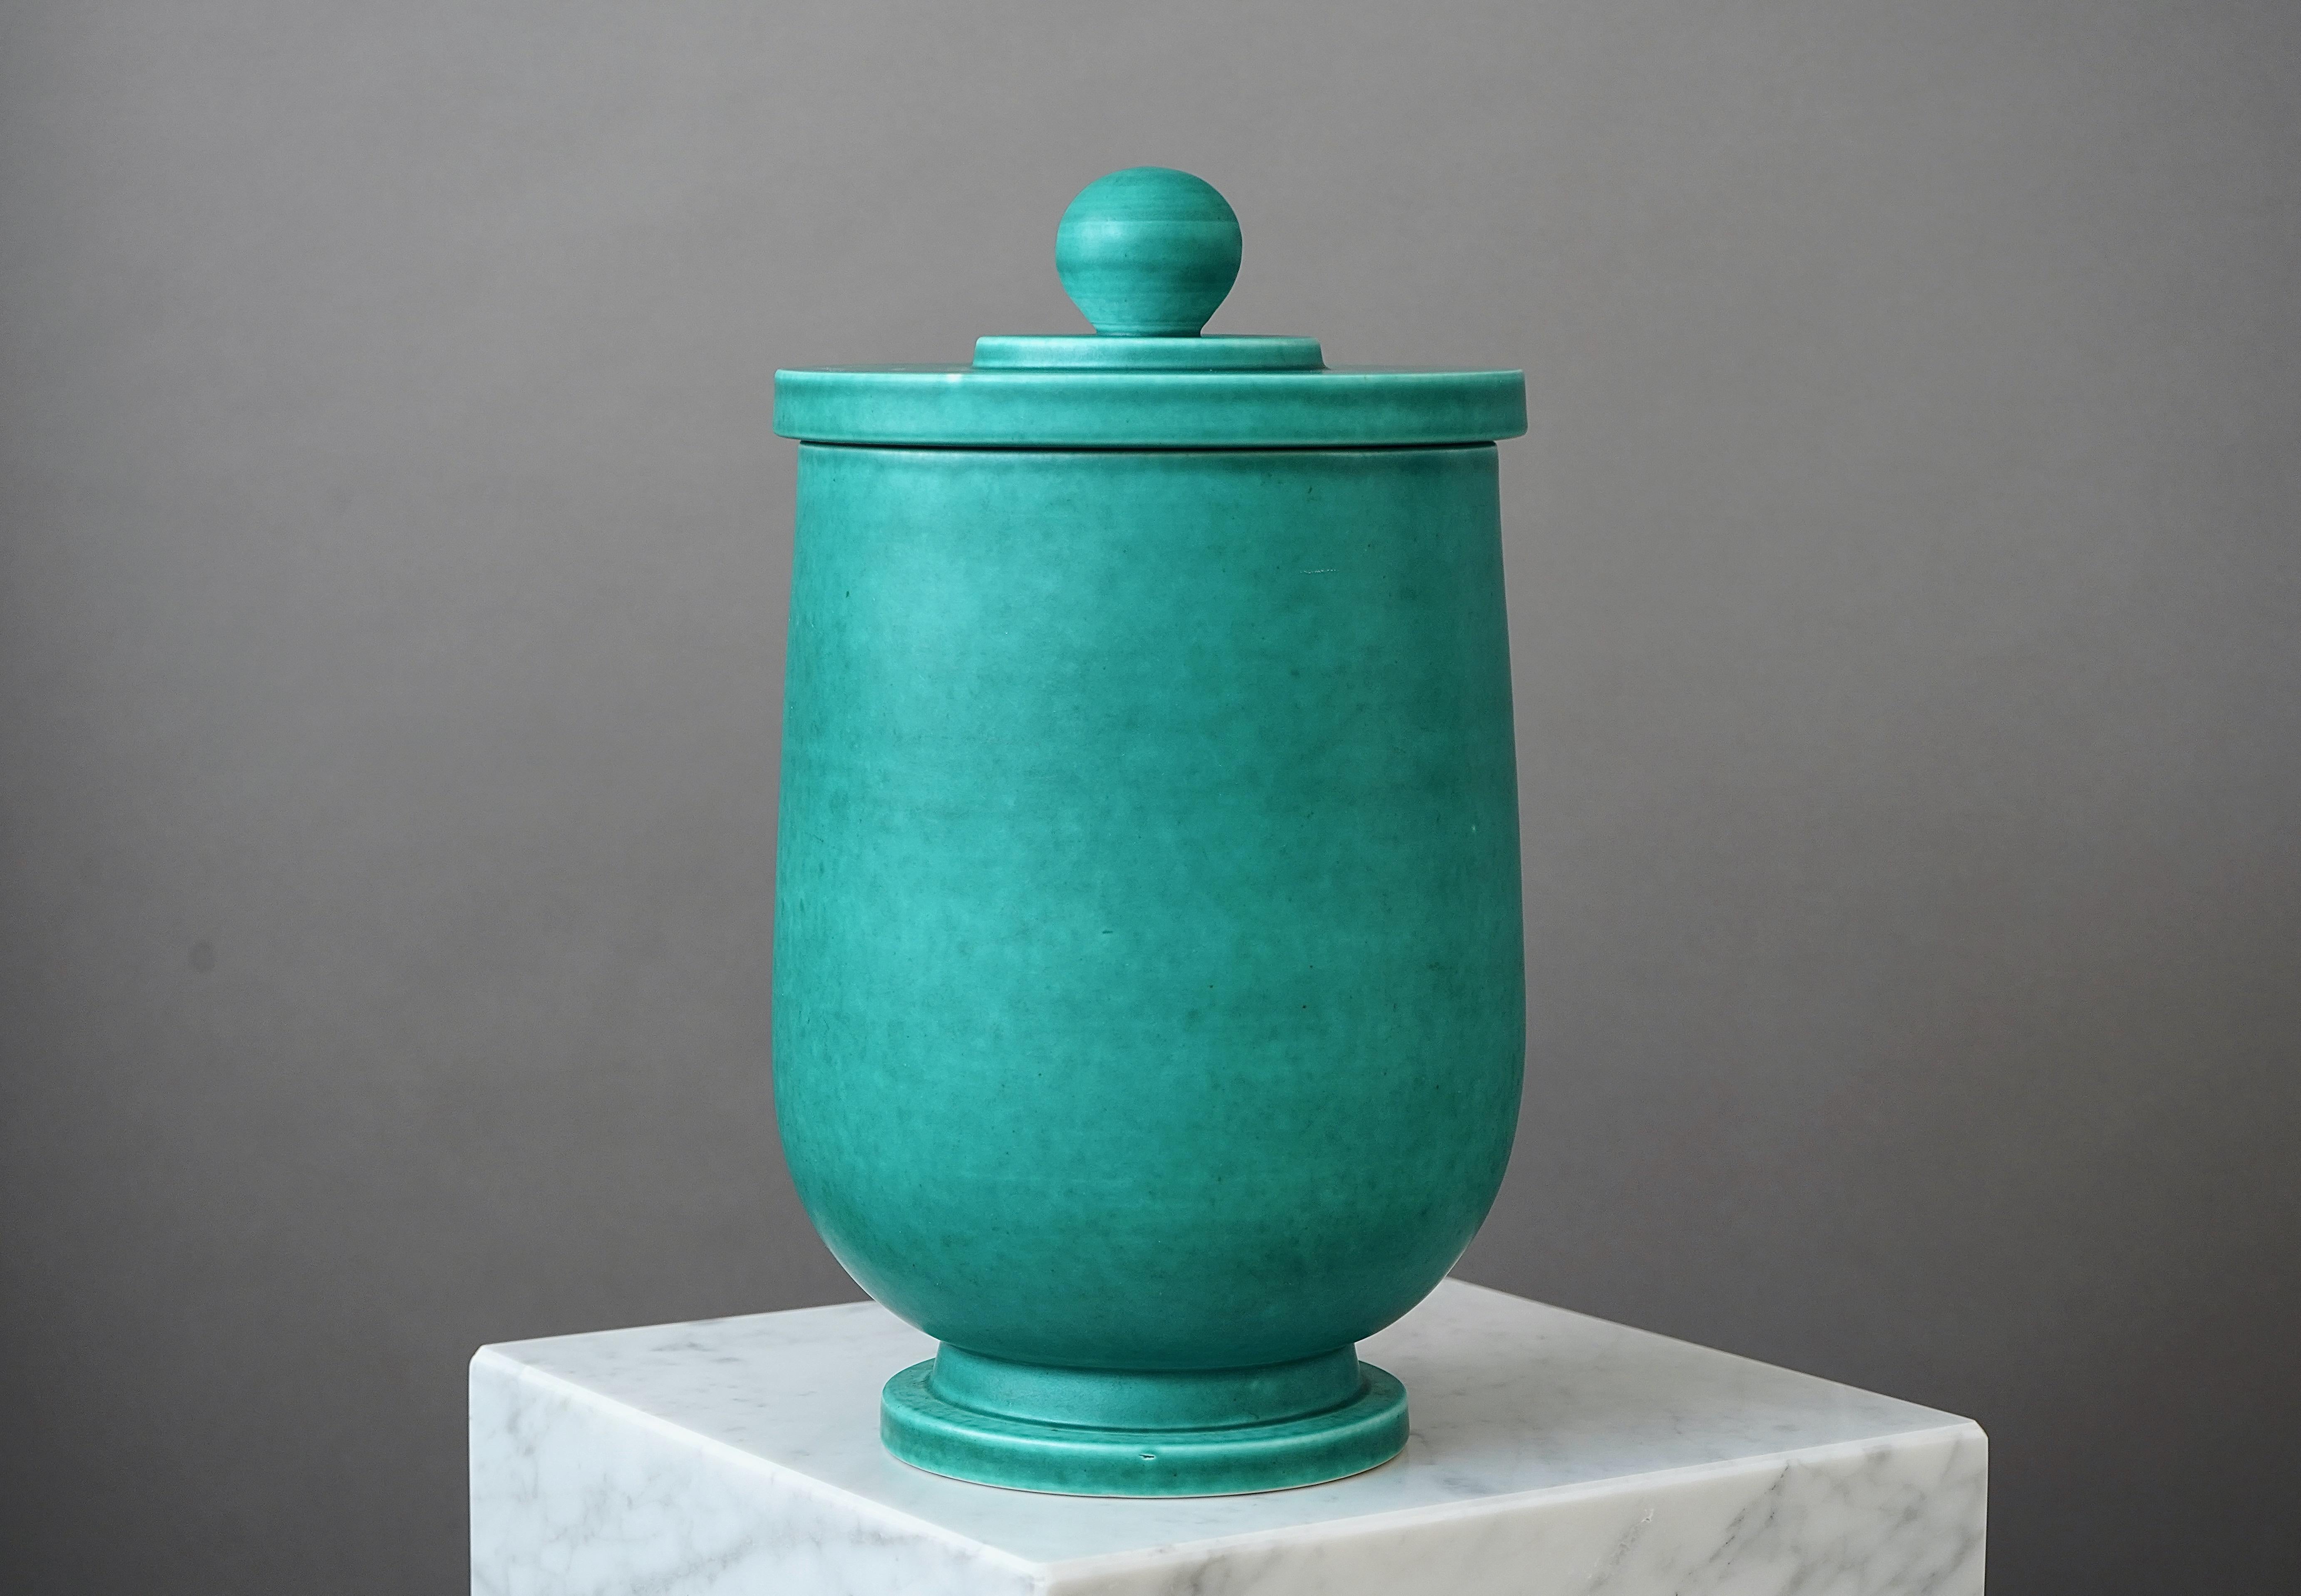 Large and Beautiful Urn made by Wilhelm Kåge at Gustavsberg Studio in Sweden, 1930s. Argenta glazed stoneware.

Excellent condition. Impressed 'Gustavsberg' and 